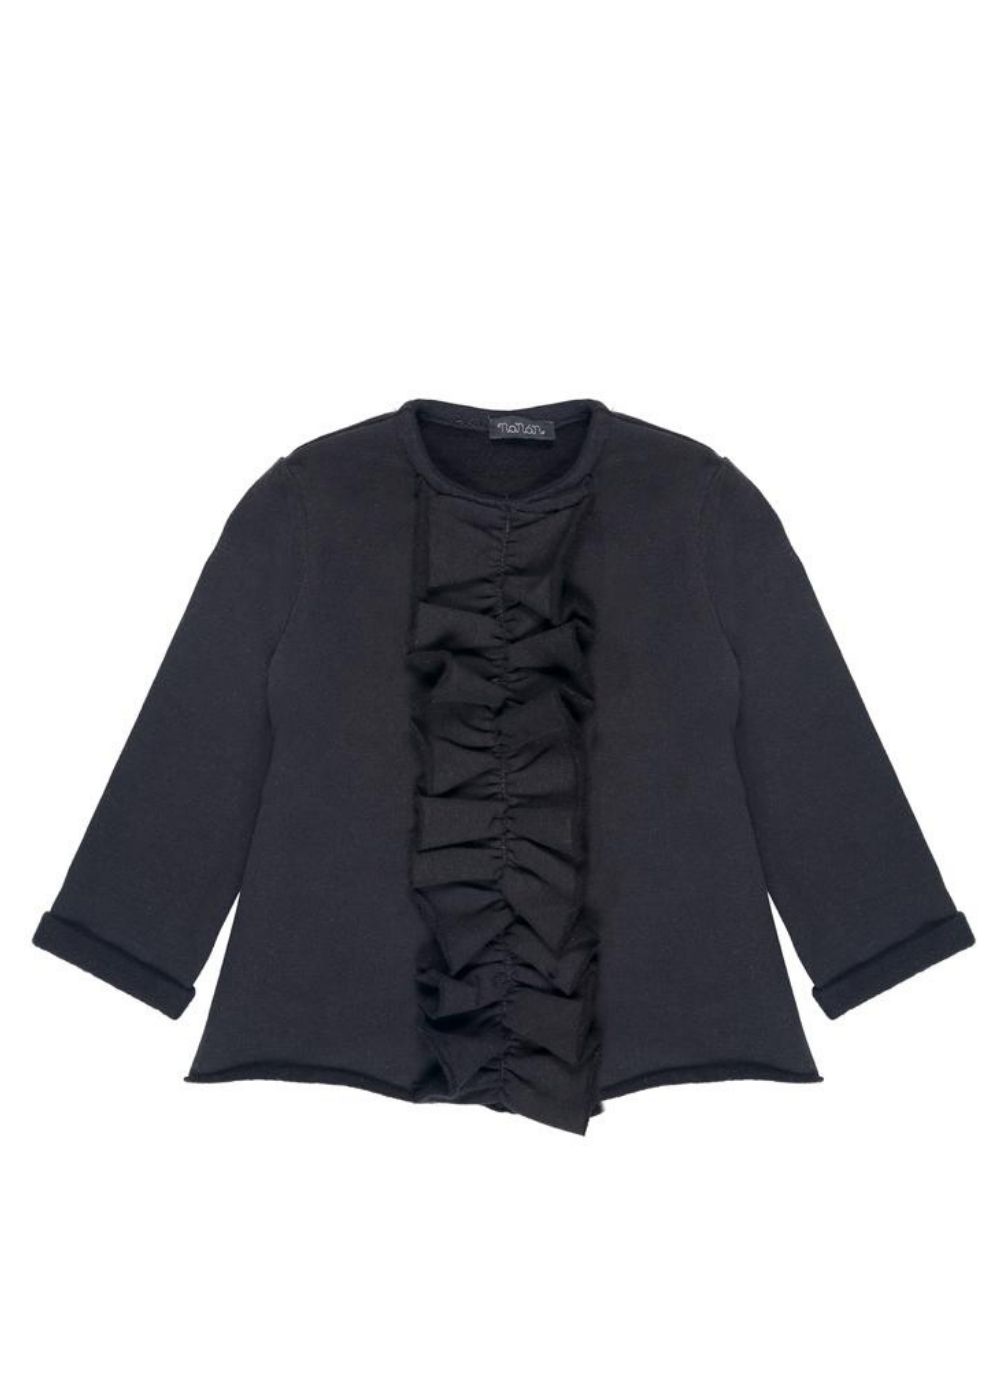 Featured image for “NANÁN BLUSA CON ROUCHE”